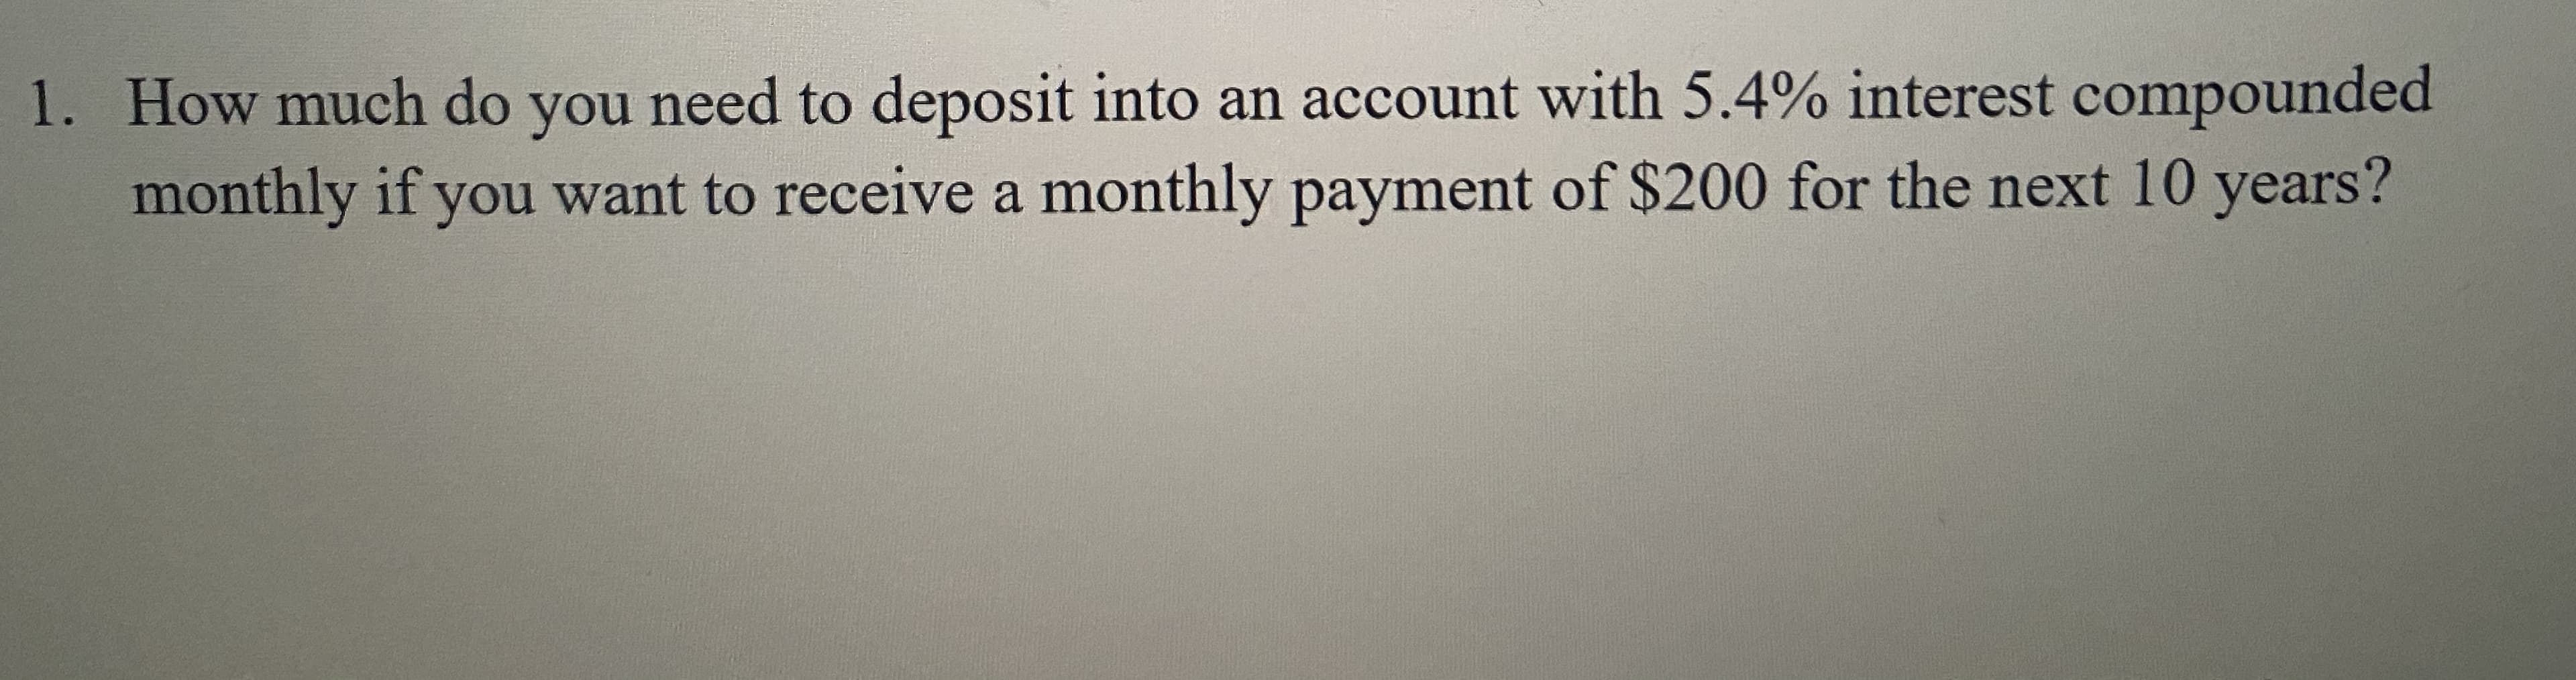 1. How much do you need to deposit into an account with 5.4% interest compounded
monthly if you want to receive a monthly payment of $200 for the next 10 years?
